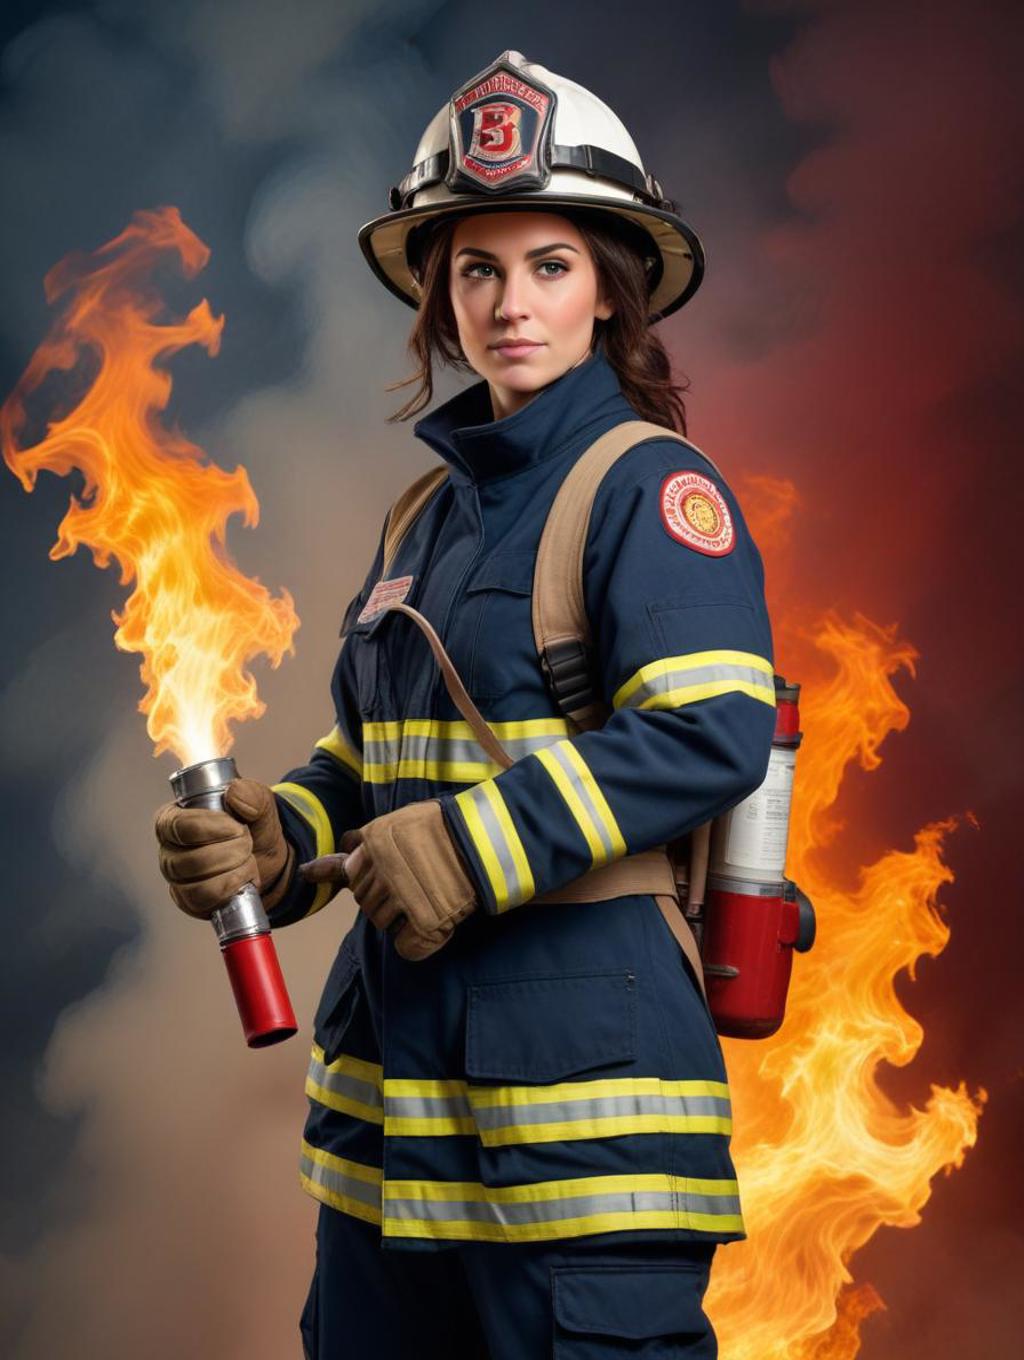 Fire Fighters Women: Portrait Photography & Wall Frames-Theme:4